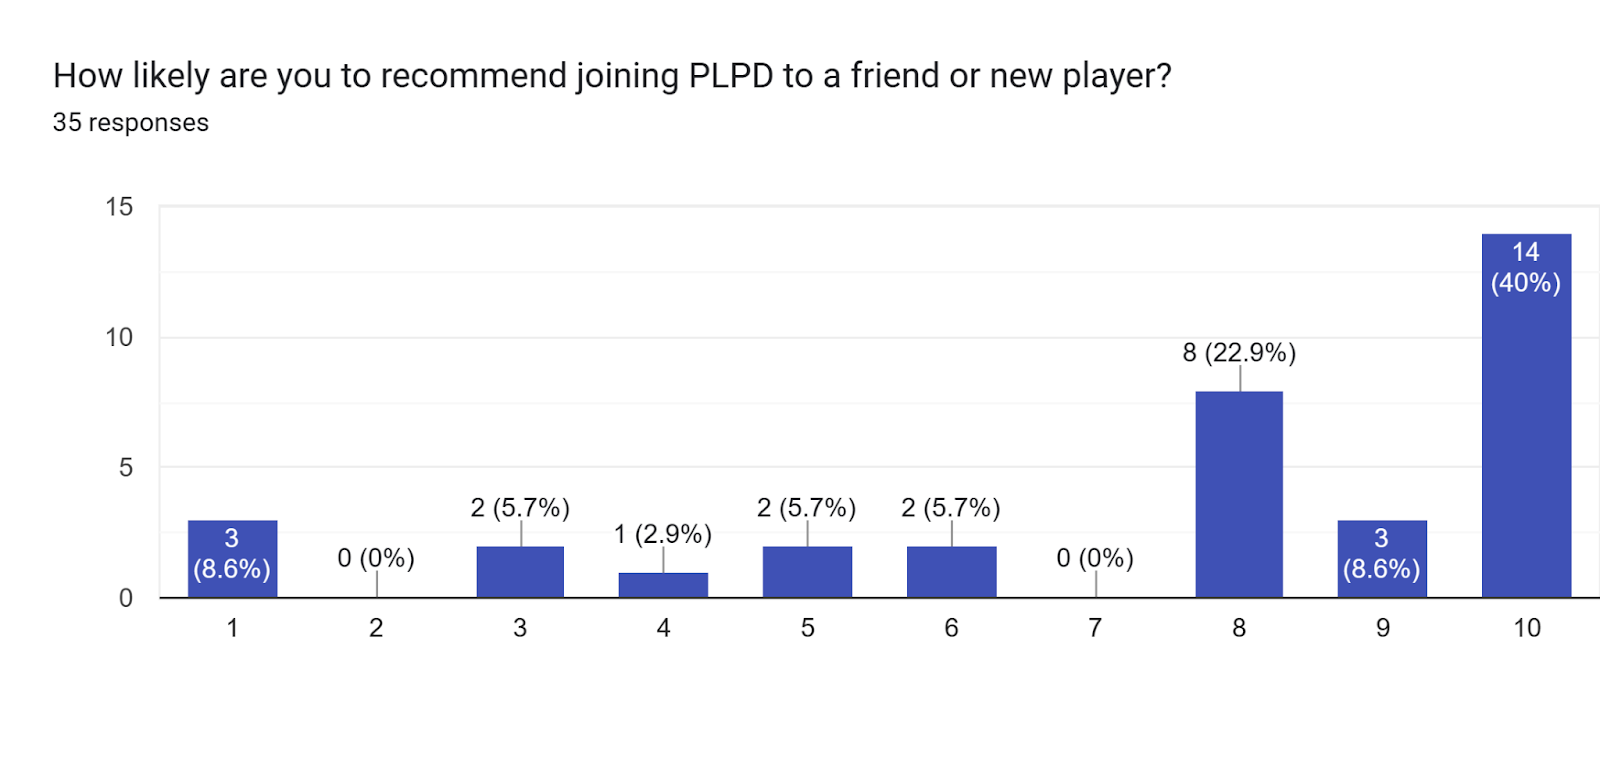 Forms response chart. Question title: How likely are you to recommend joining PLPD to a friend or new player?. Number of responses: 35 responses.